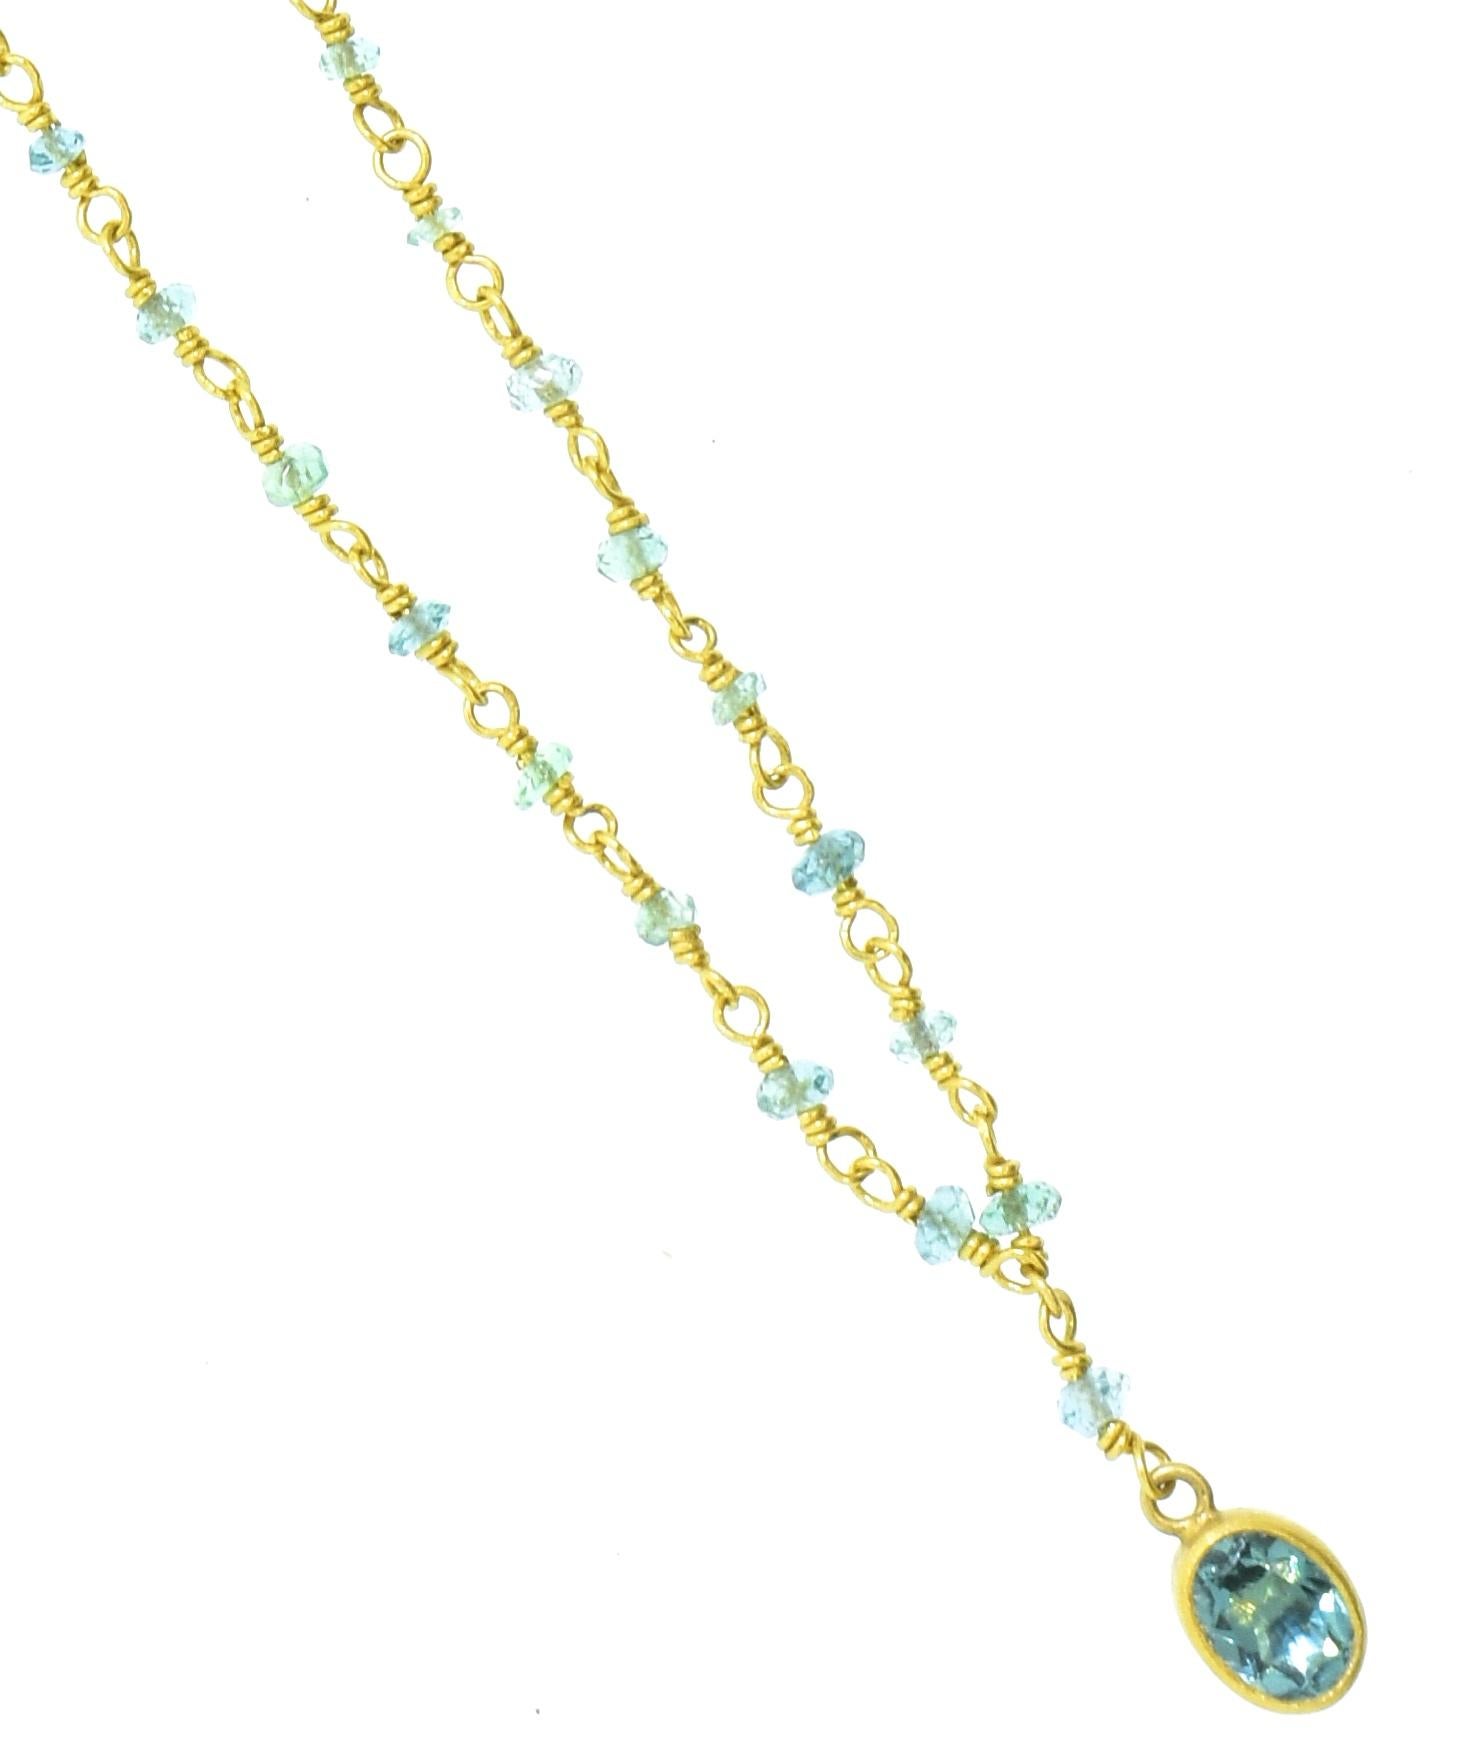 Women's or Men's Aquamarine and Yellow Gold Necklace